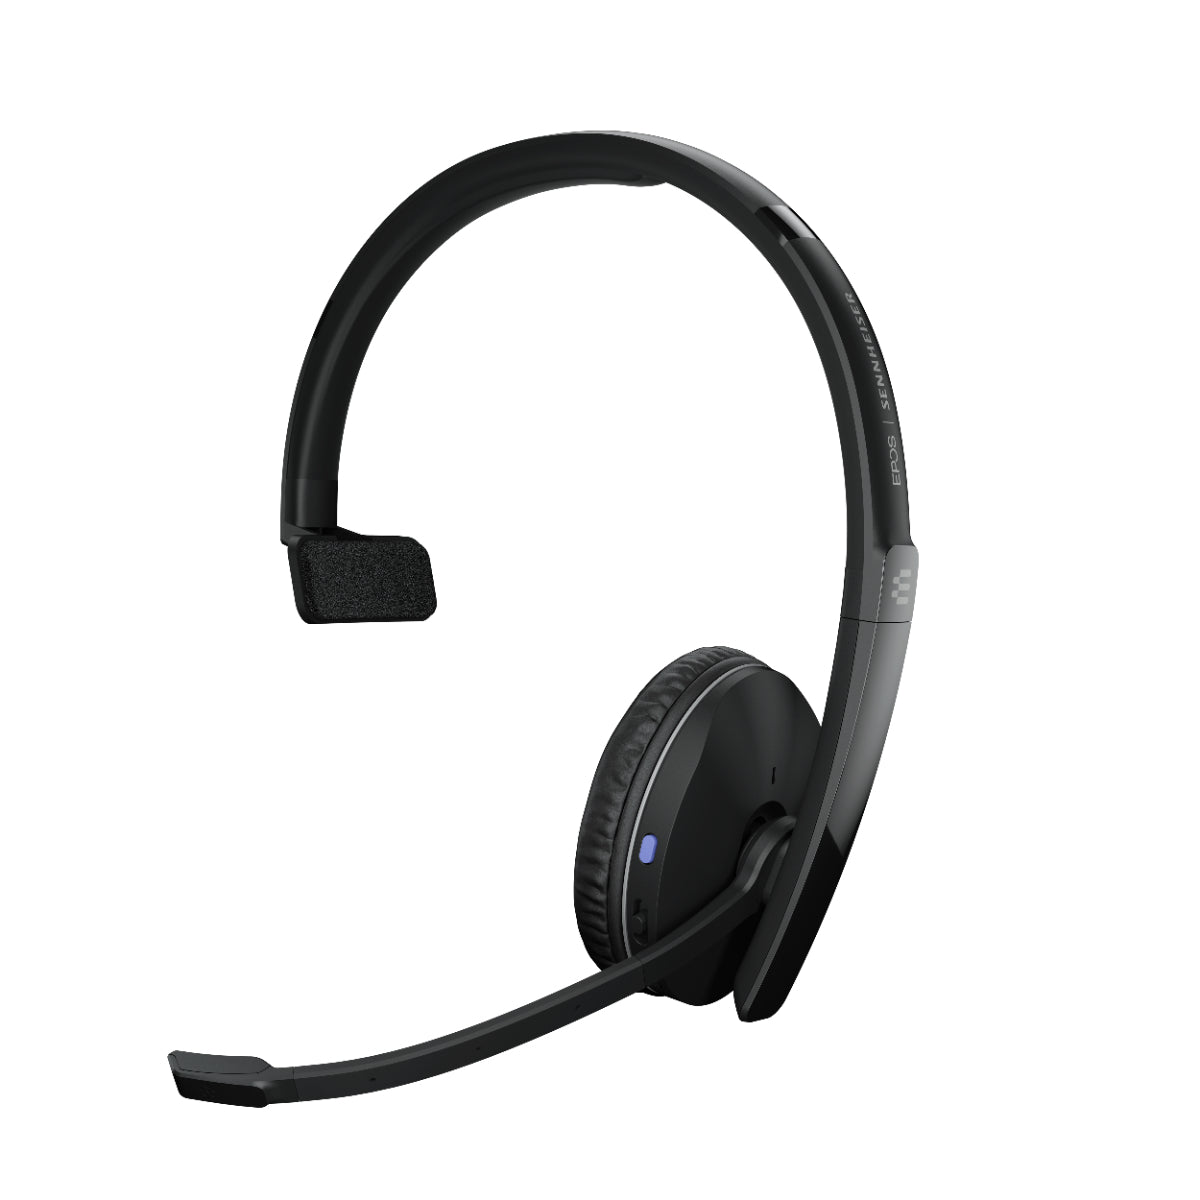 EPOS ADAPT 230 BT Monaural Headset, On-ear, MS Teams Certified, With Dongle & Case